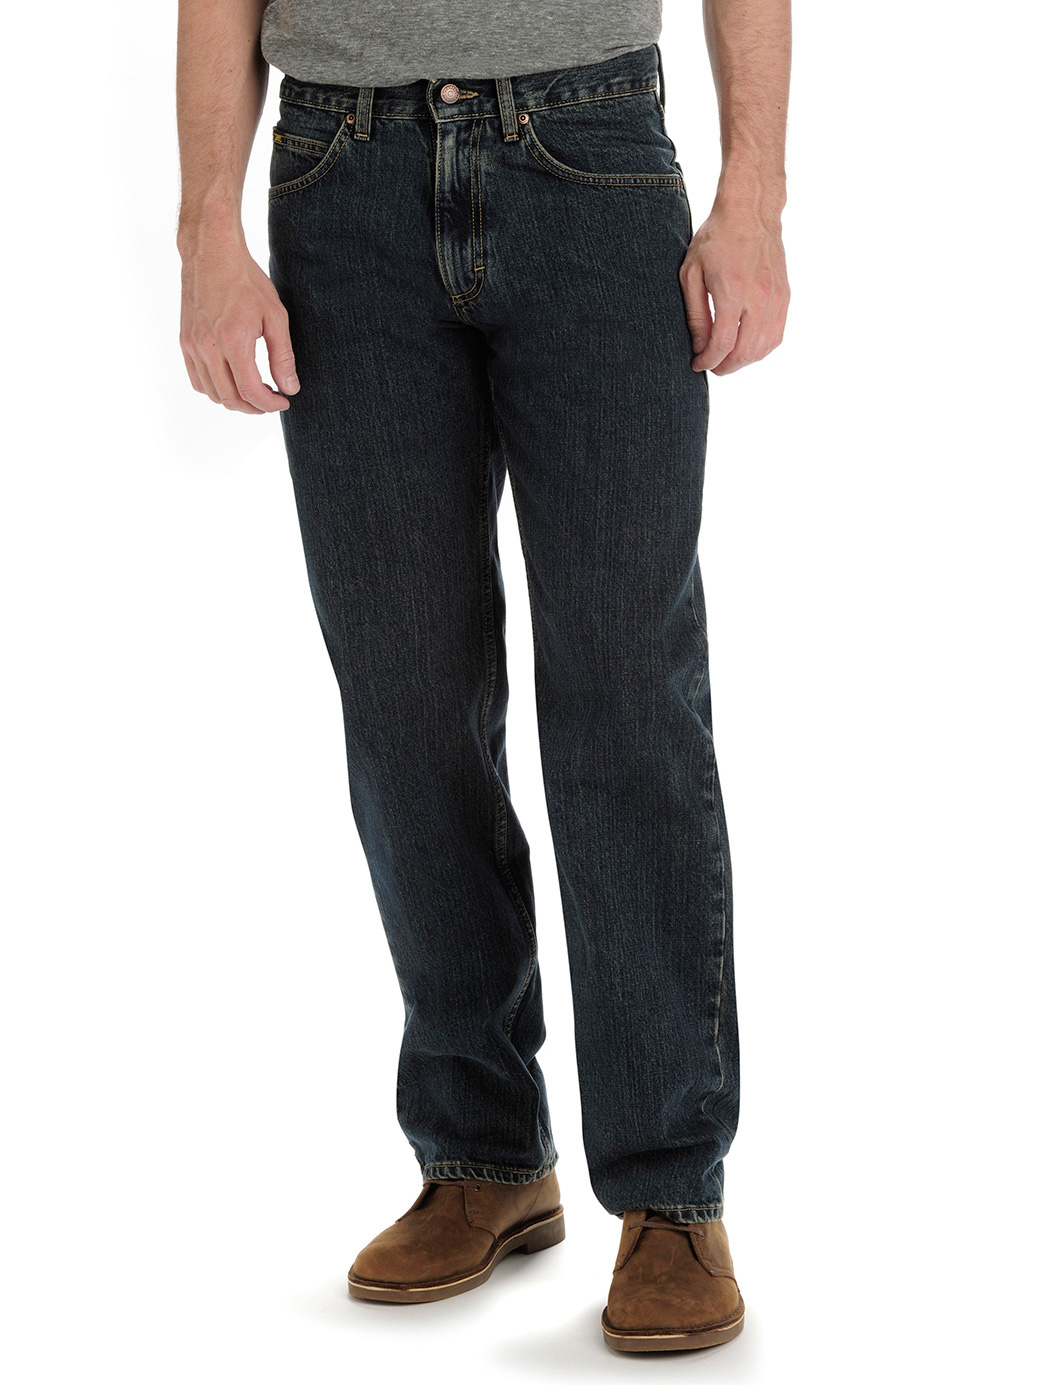 Lee Men's Relaxed Fit Straight Leg Jeans - Tomas, Tomas, 40X36 - image 1 of 3